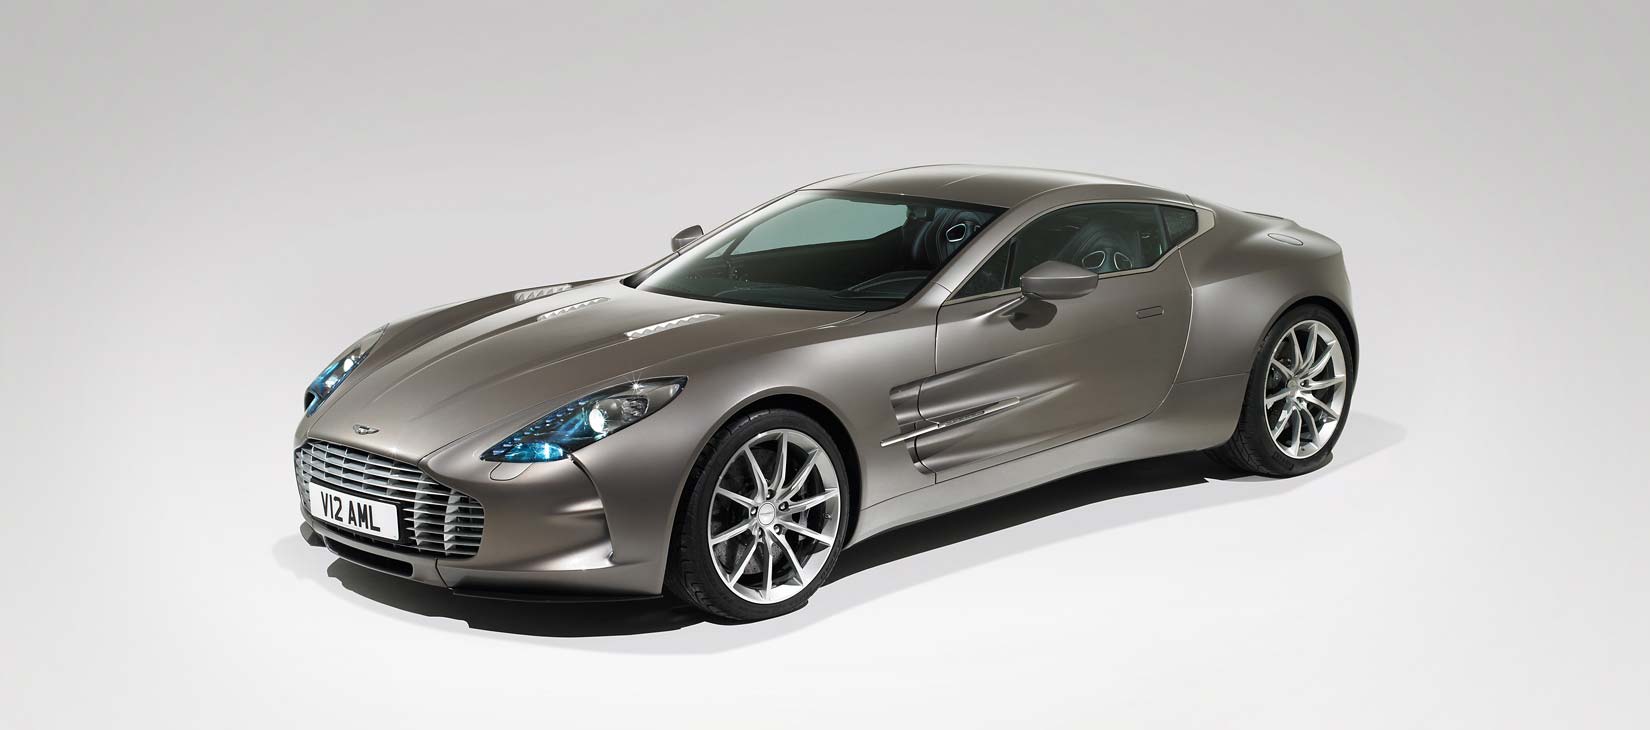 10 most powerful cars in the world - Aston Martin One-77